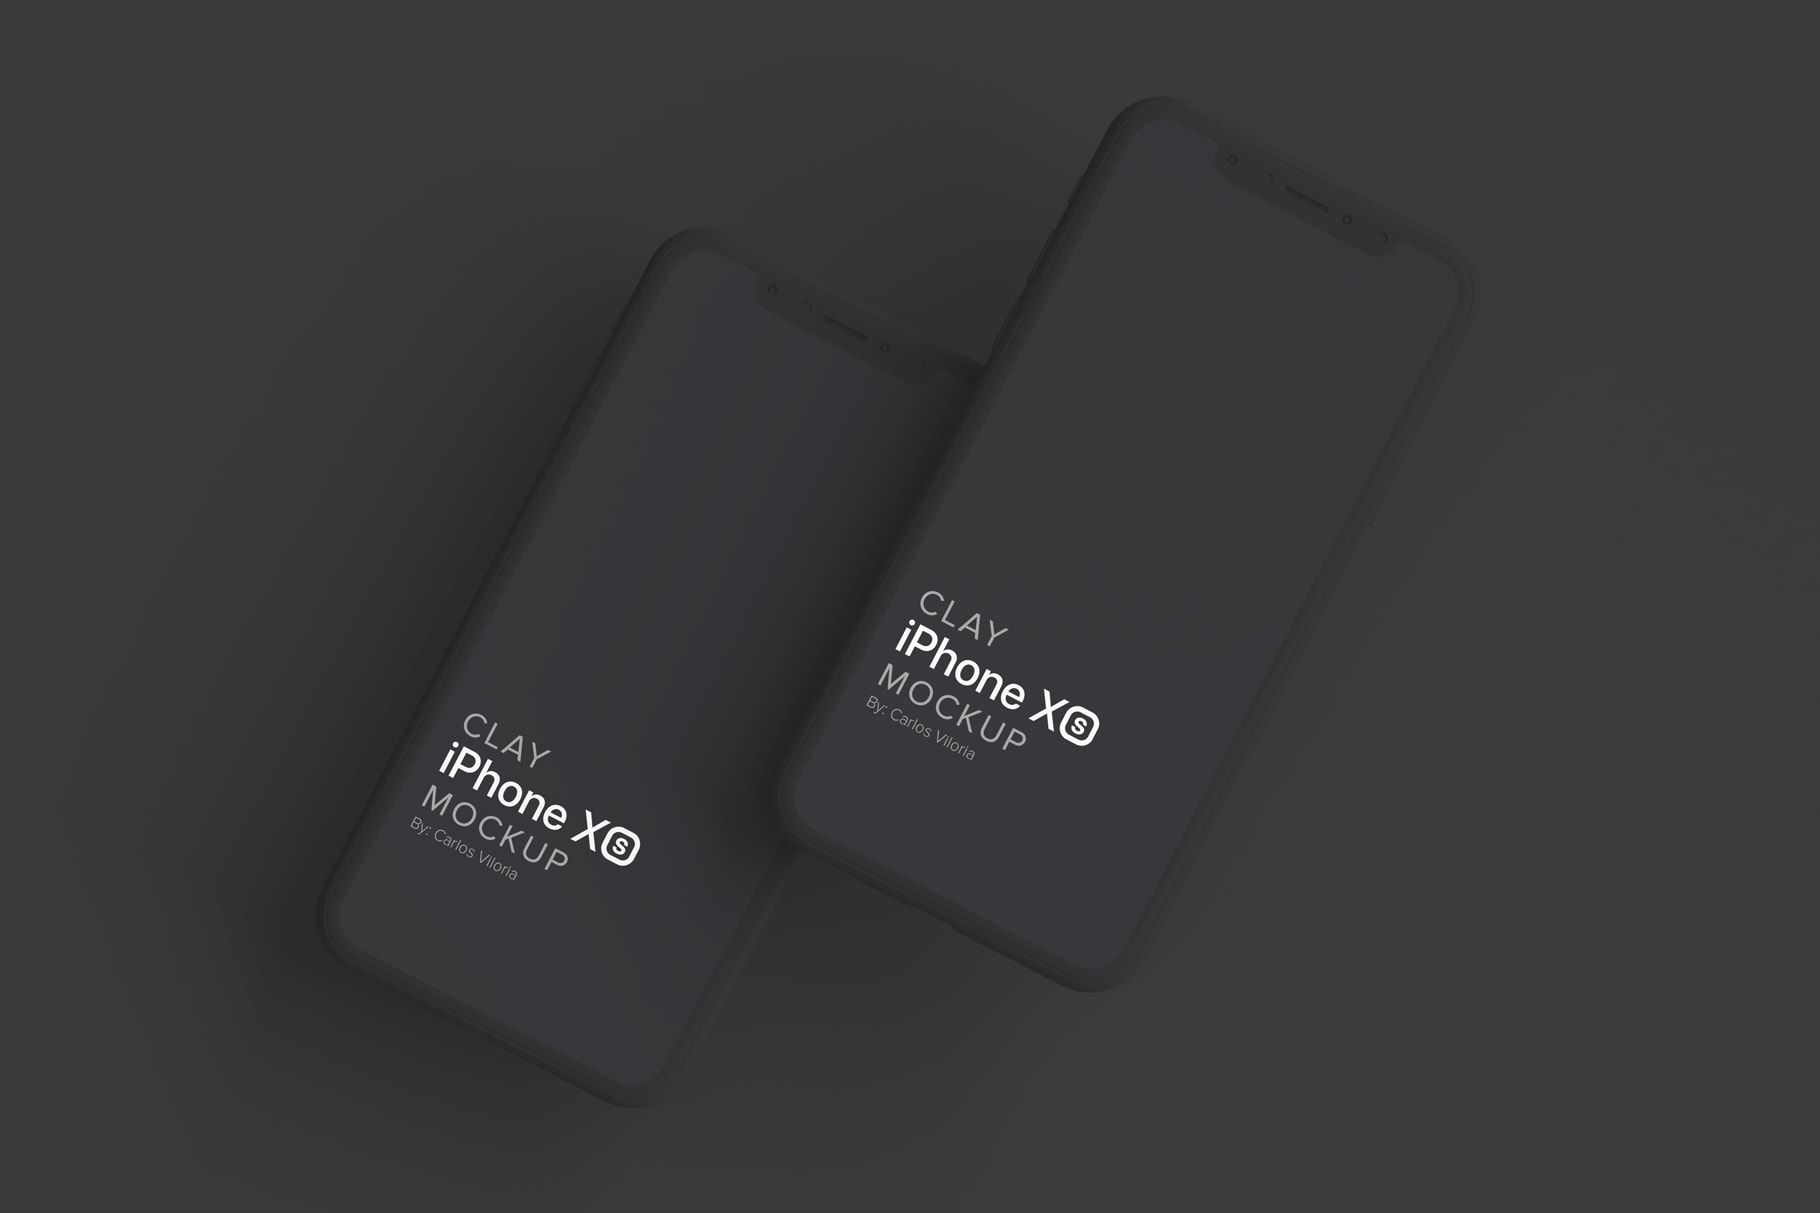 Clay Iphone Mockup for Ios Apps